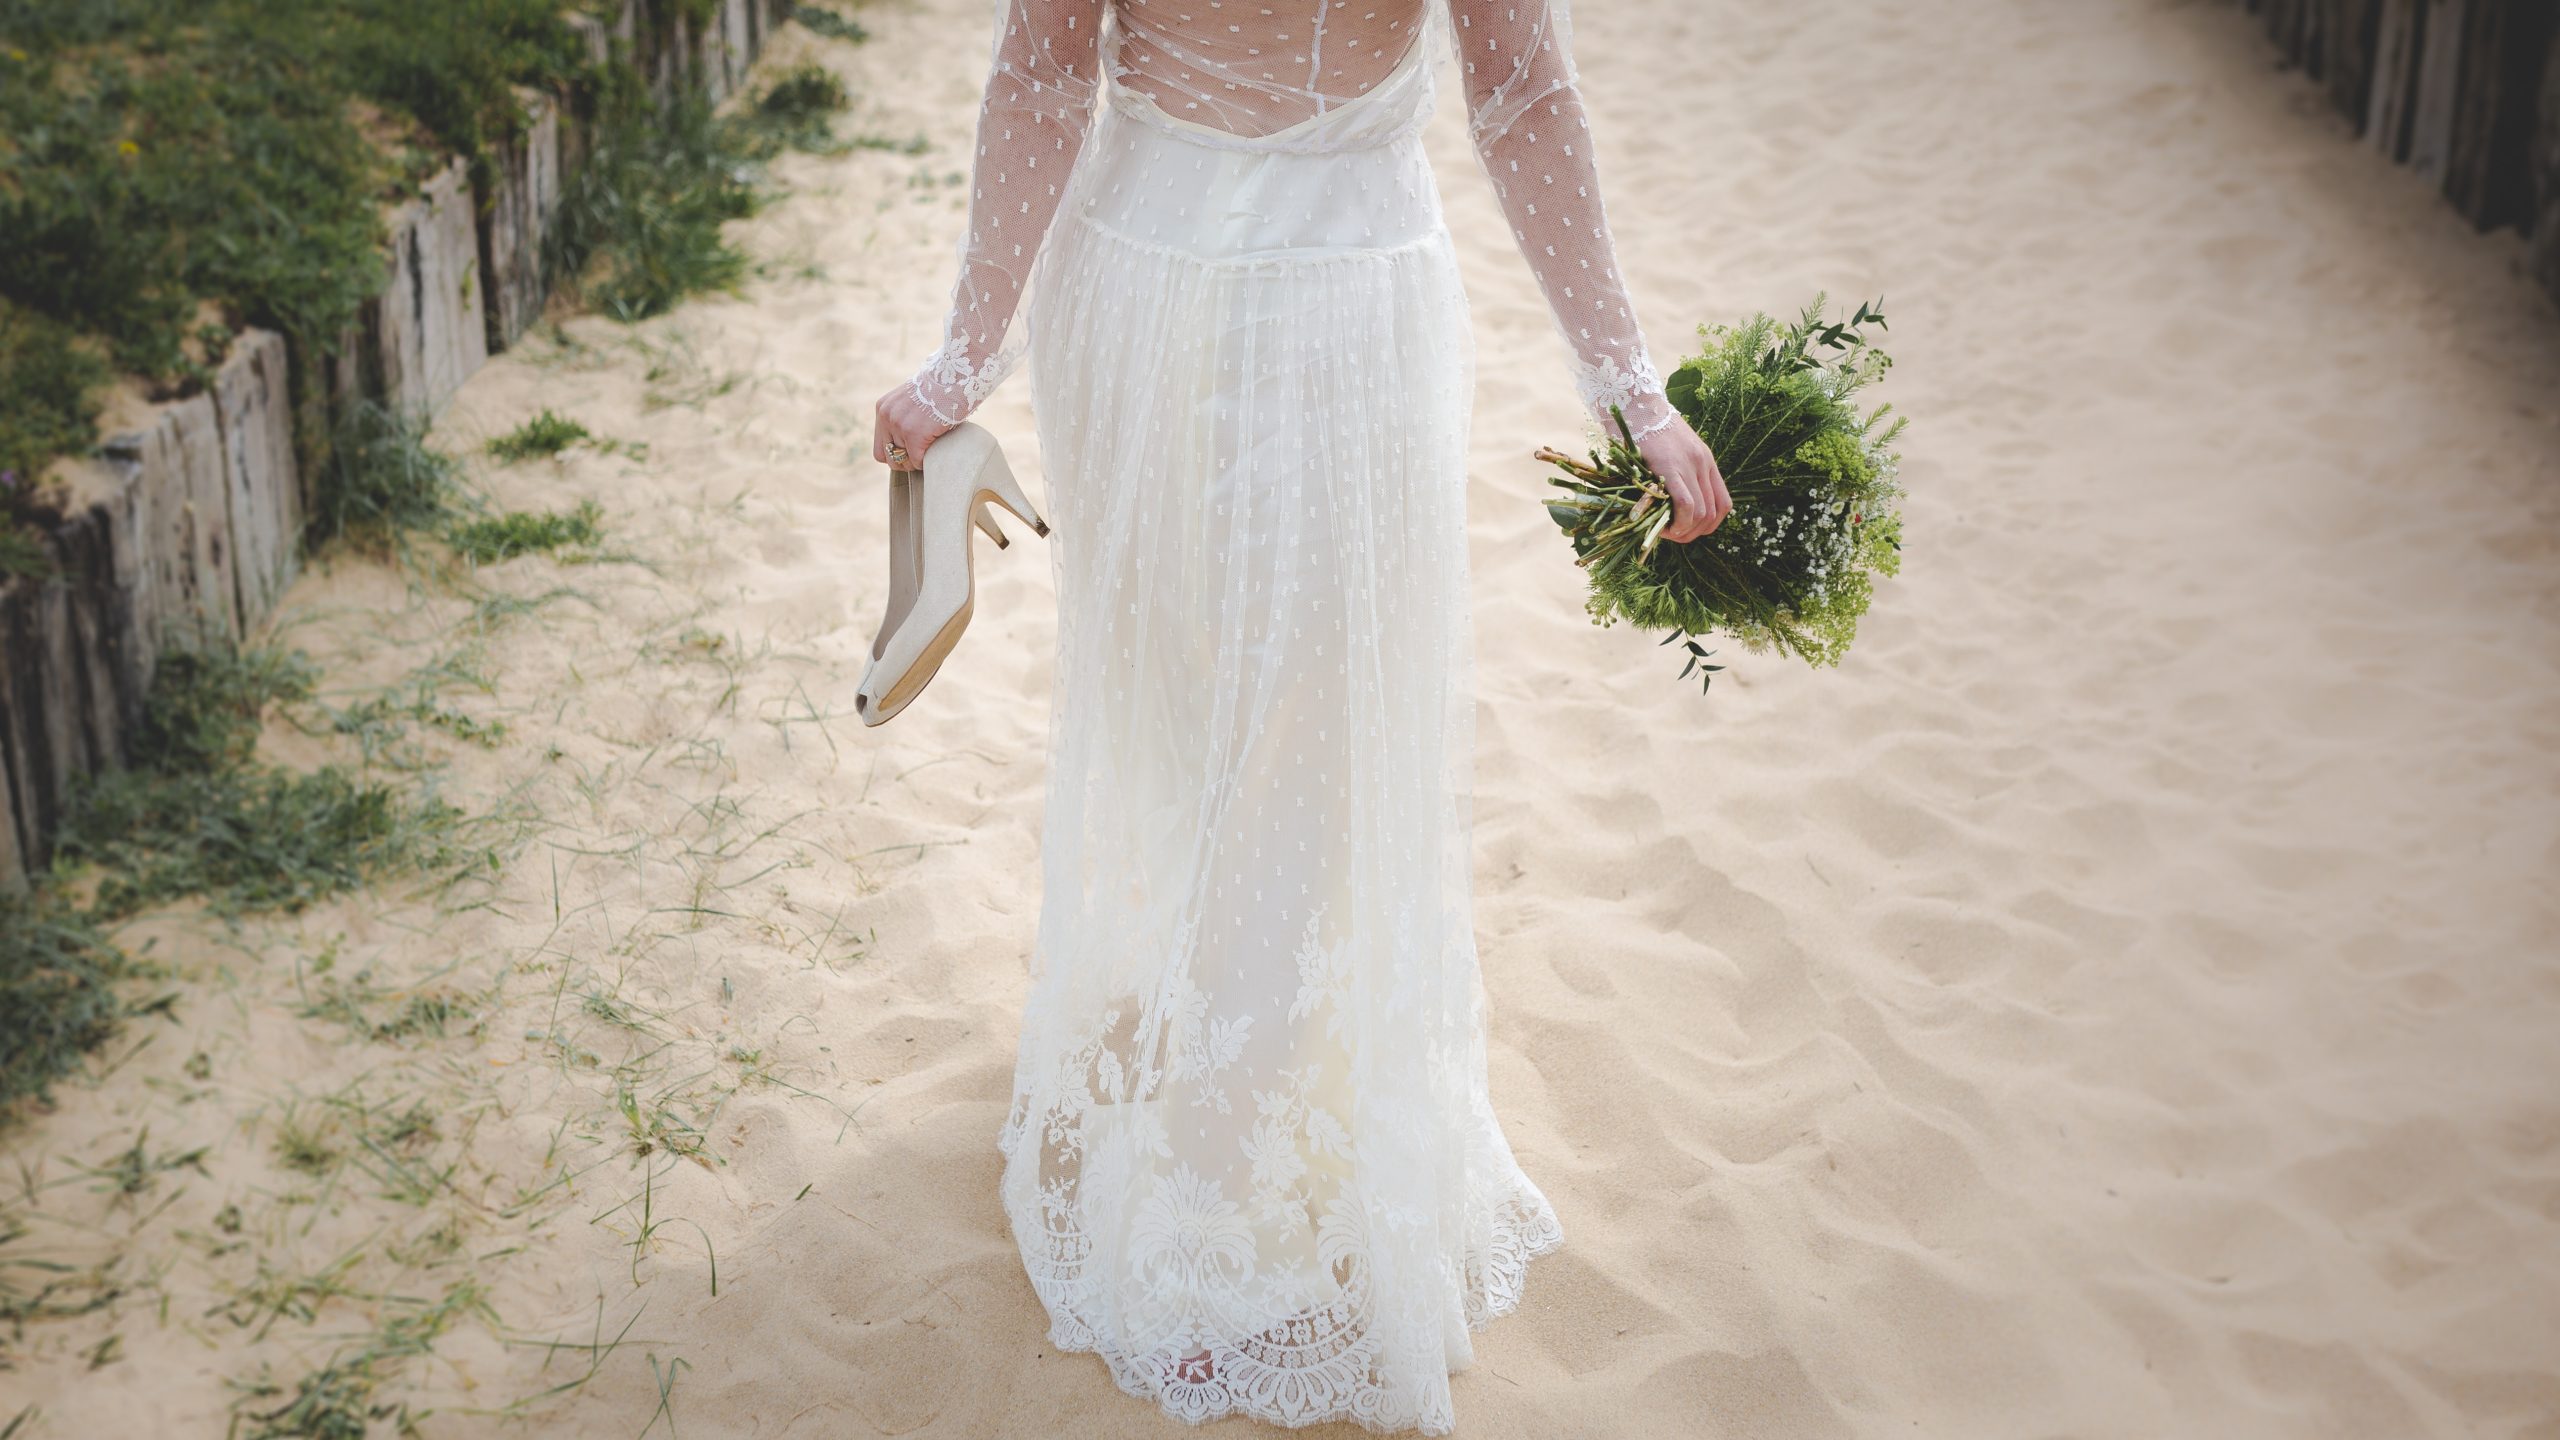 the back of a woman walking on the beach wearing a wedding dress and holding her shoes in her hand